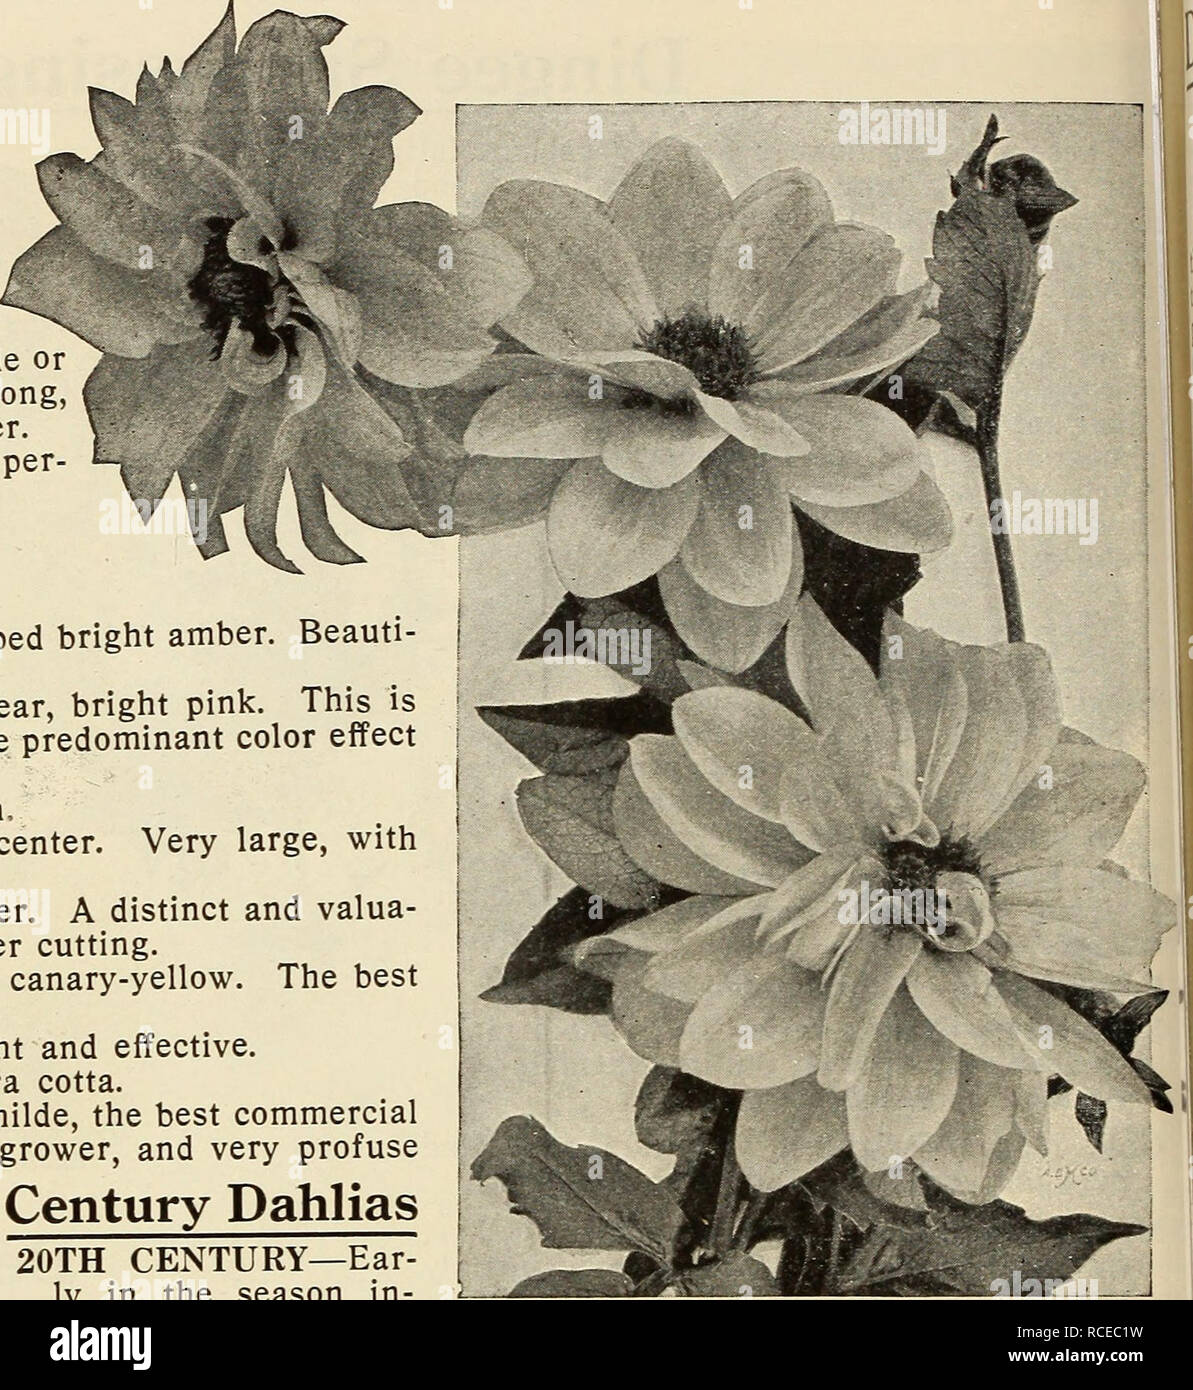 . Dingee guide to rose culture. . Peony-flowered Dahlia. Cactus Dahlia. 20TH CENTURY—Ear- ly in the season in- tense rosy crimson, shading to white at tips and base of petals, but as the season advances the flowers open lighter, until by October they are nearly white, a bright pink blotch in the center of the petals. FRINGED 20TH CENTURY—The first of a new race, with cleft or serrated petals. A great improvement of 20th Century, much larger, brighter color, while the stems are long, slender and stiff. Bright rosy crimson, with lighter markings. Height 4 feet. GIGANTEA ALBA CENTURY—Snow white,  Stock Photo